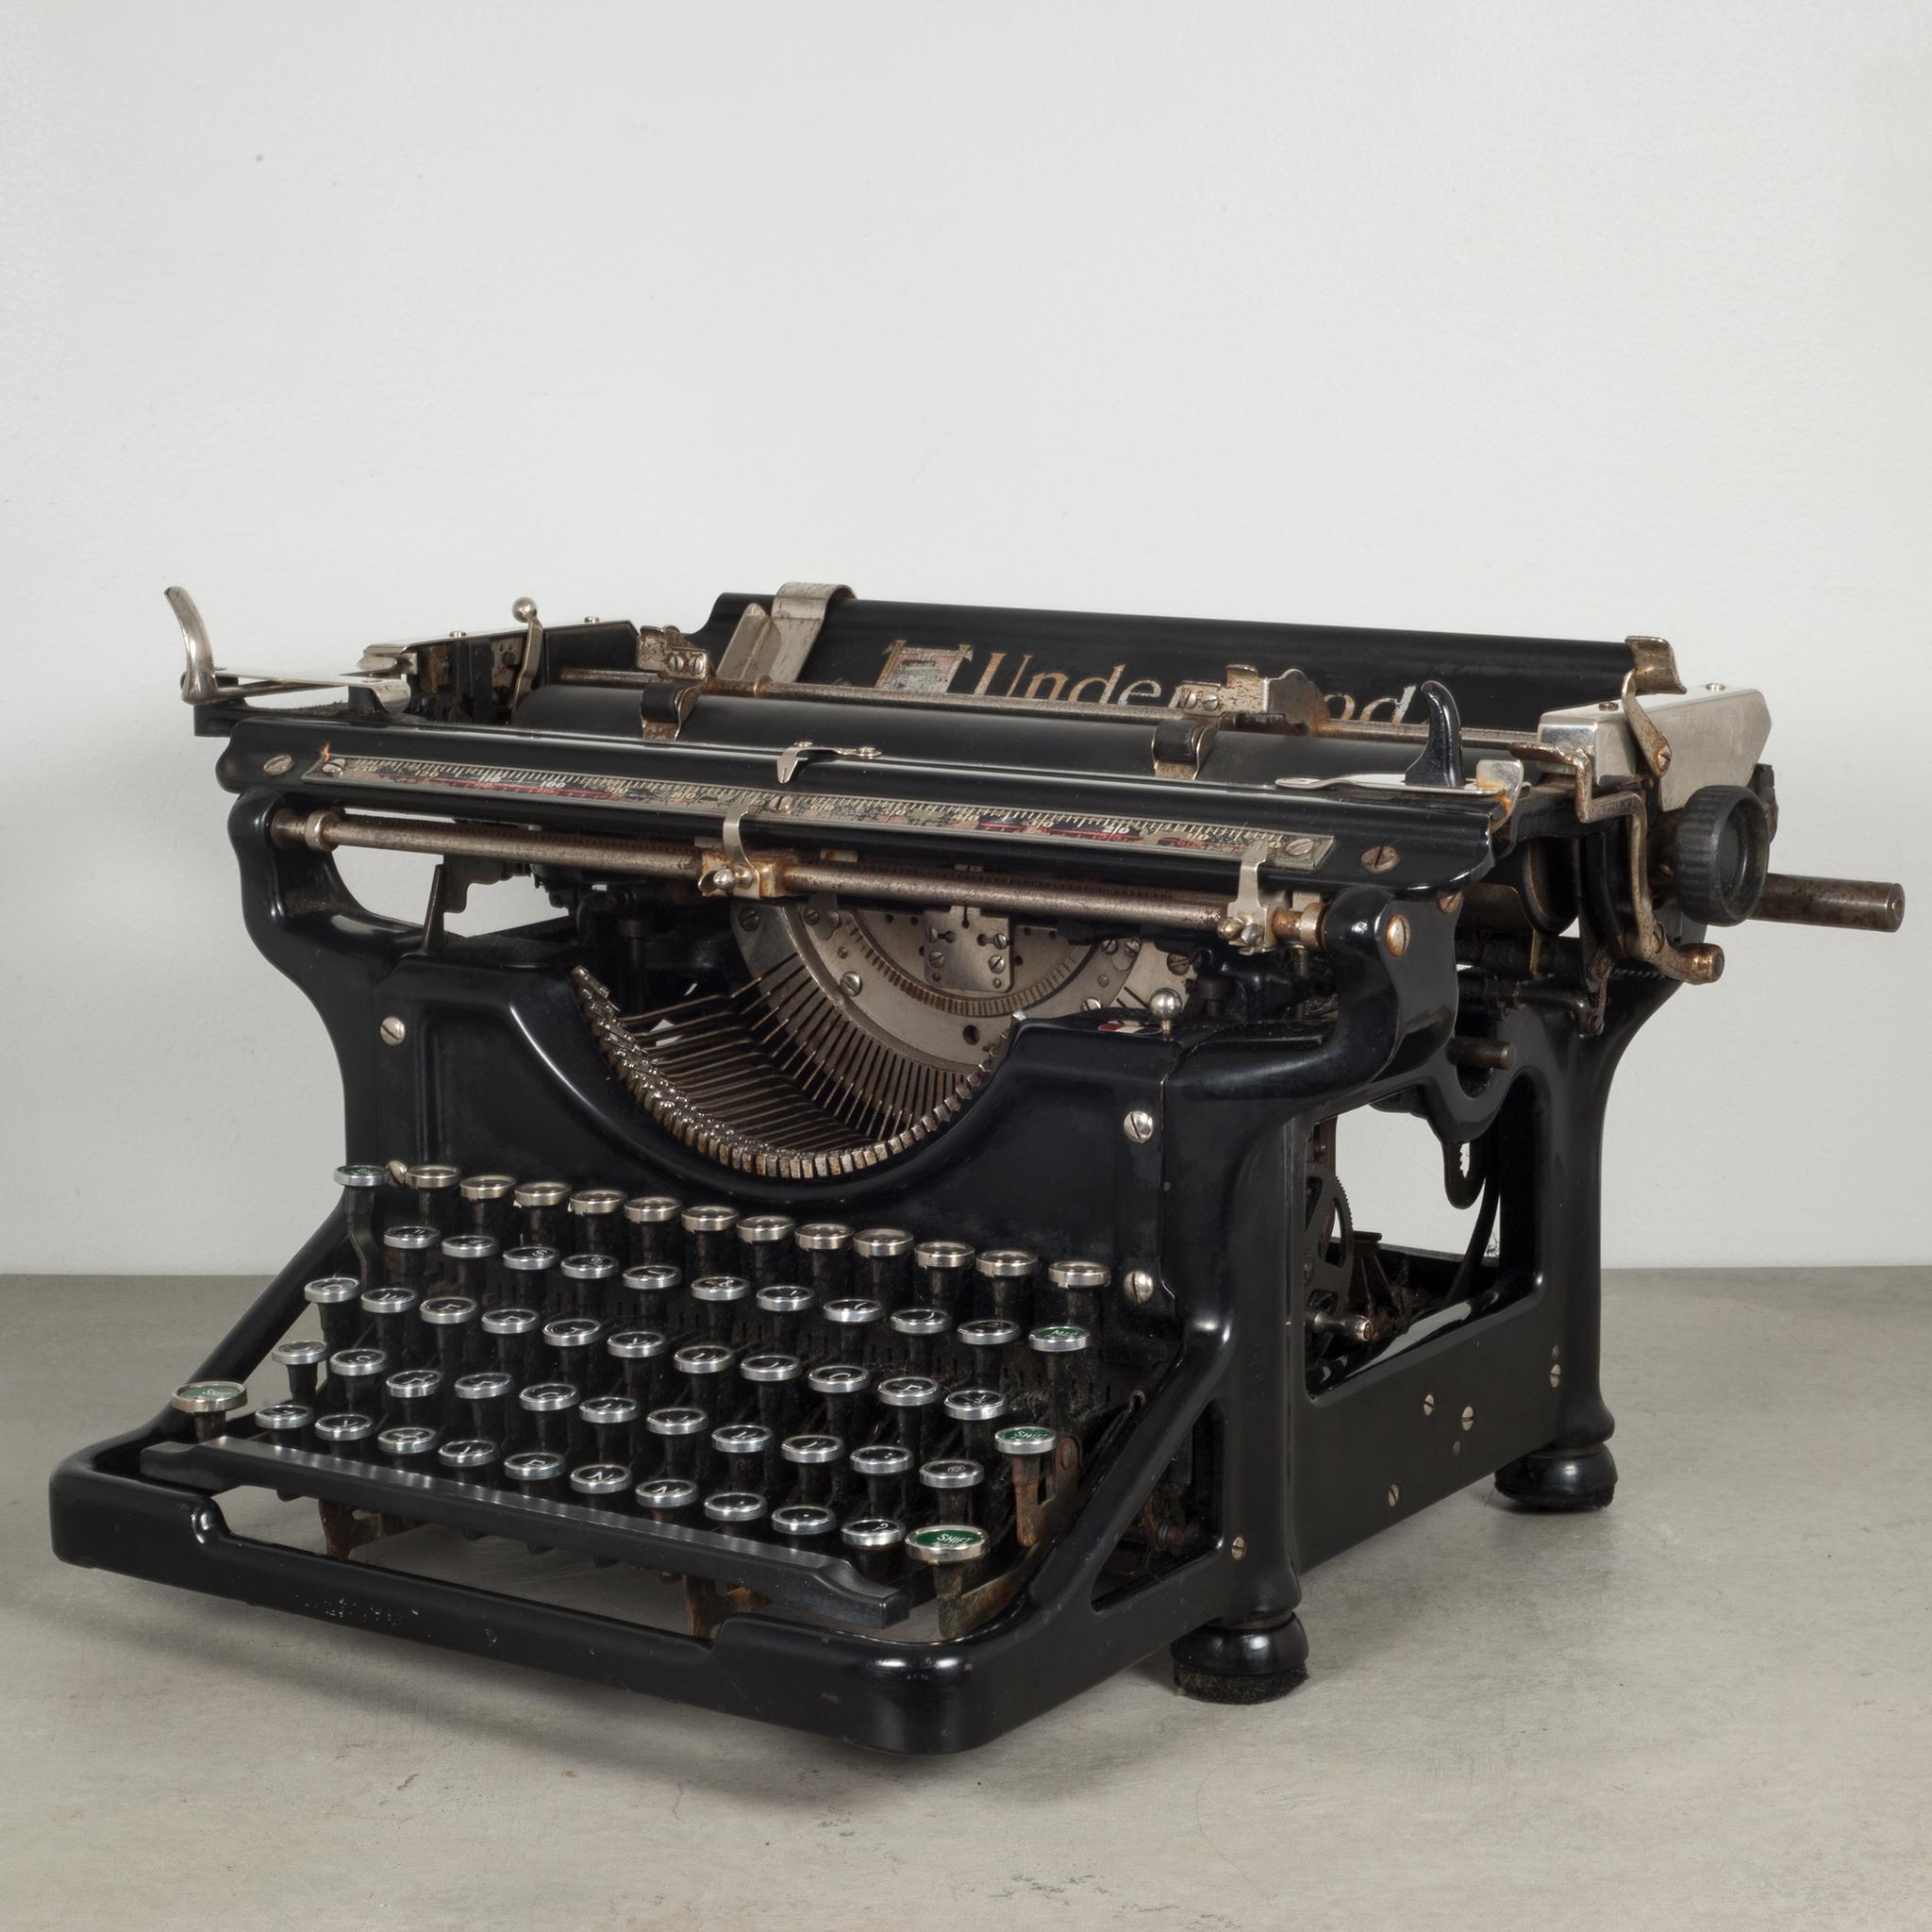 About

This is an original Underwood typewriter #6 12 with a 12 inch carriage and an open-frame design. The serial number is 4172824-12 stamped in the inside. The keys are nickel with black and white numbers and green and white on the sides. Five